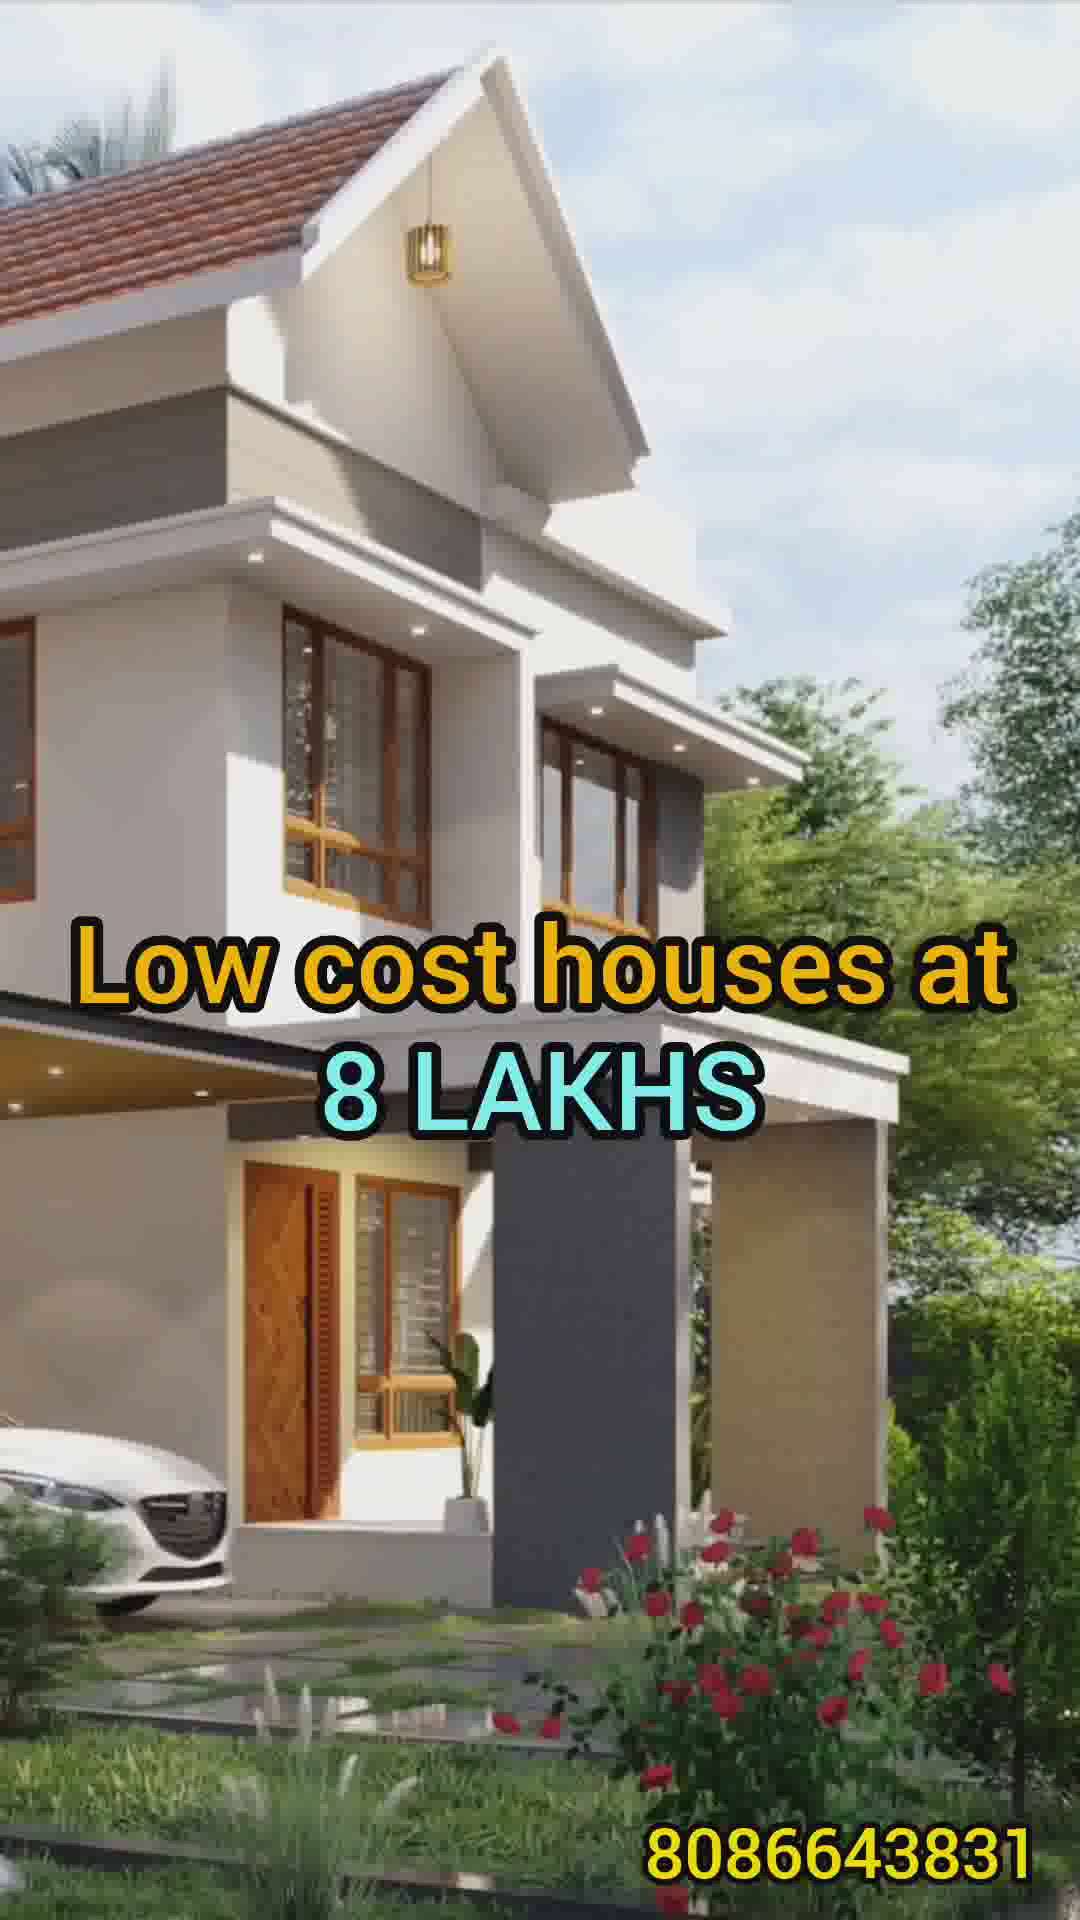 low cost houses starting at 8 lakhs  #lowbudget #2022 #new_home #koloapp #trivandrum@ #viralhousedesign #ElevationHome #50LakhHouse #1000SqftHouse